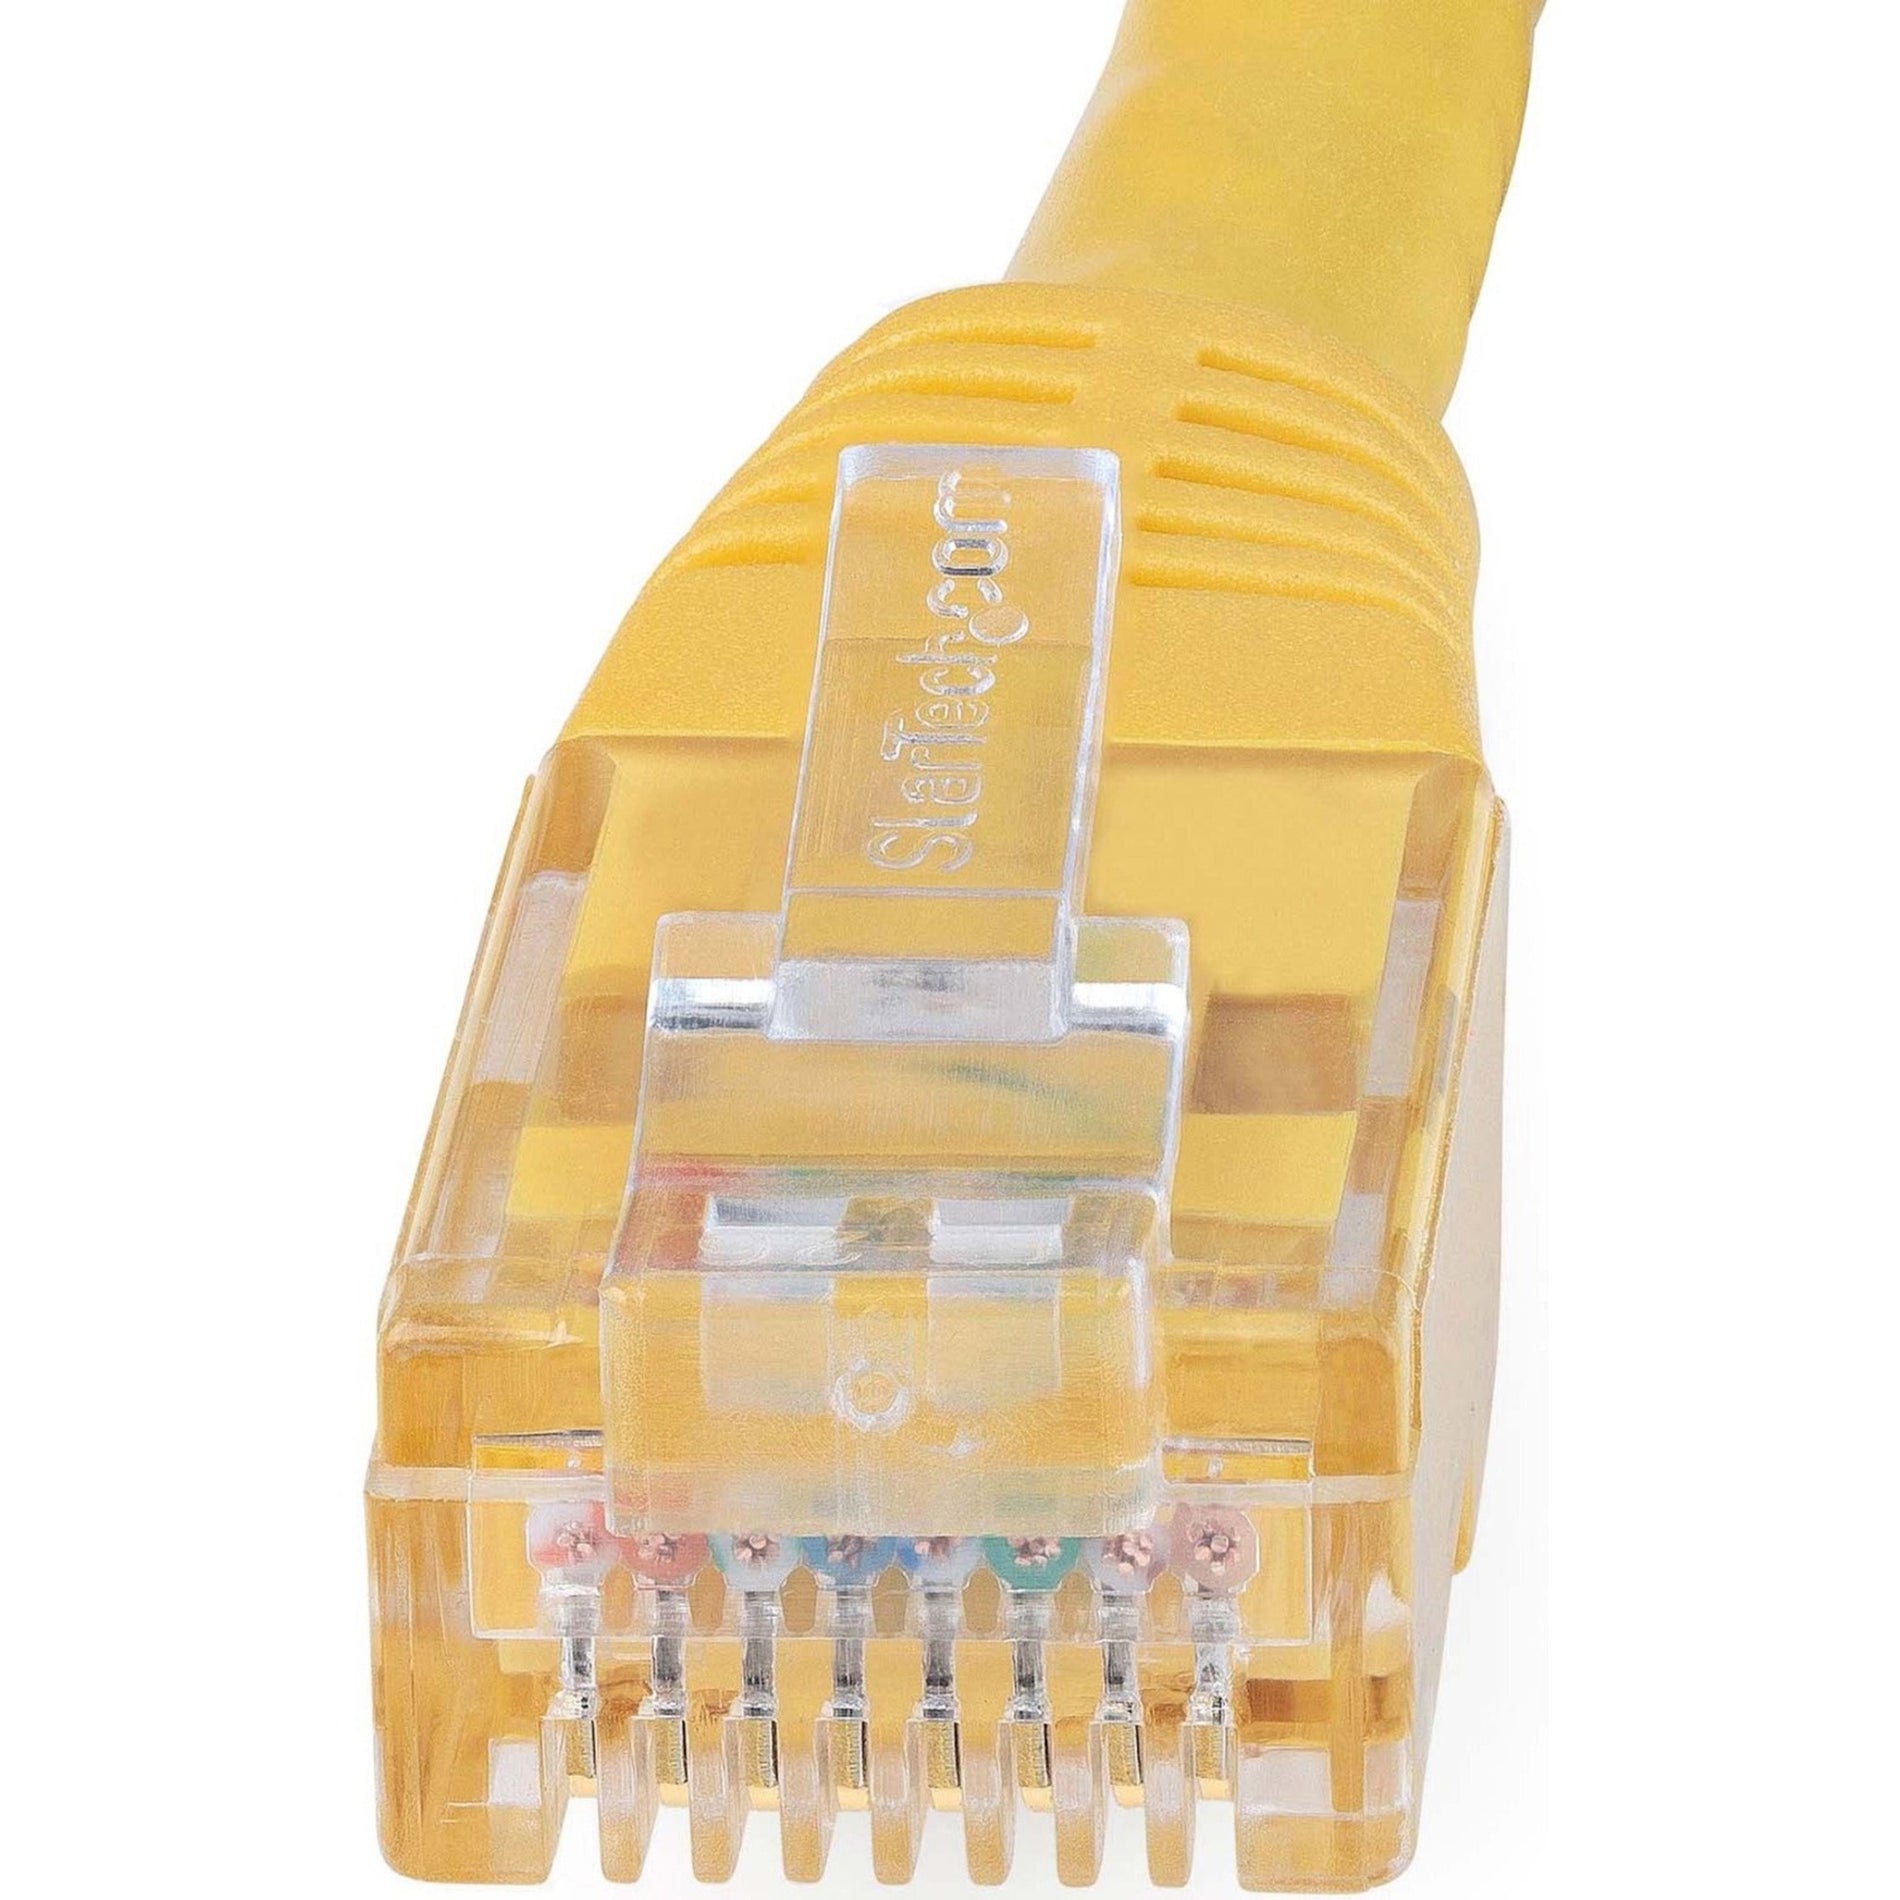 StarTech.com C6PATCH4YL 4ft Yellow Cat6 UTP Patch Cable ETL Verified, 10 Gbit/s Data Transfer Rate, Gold Plated Connectors